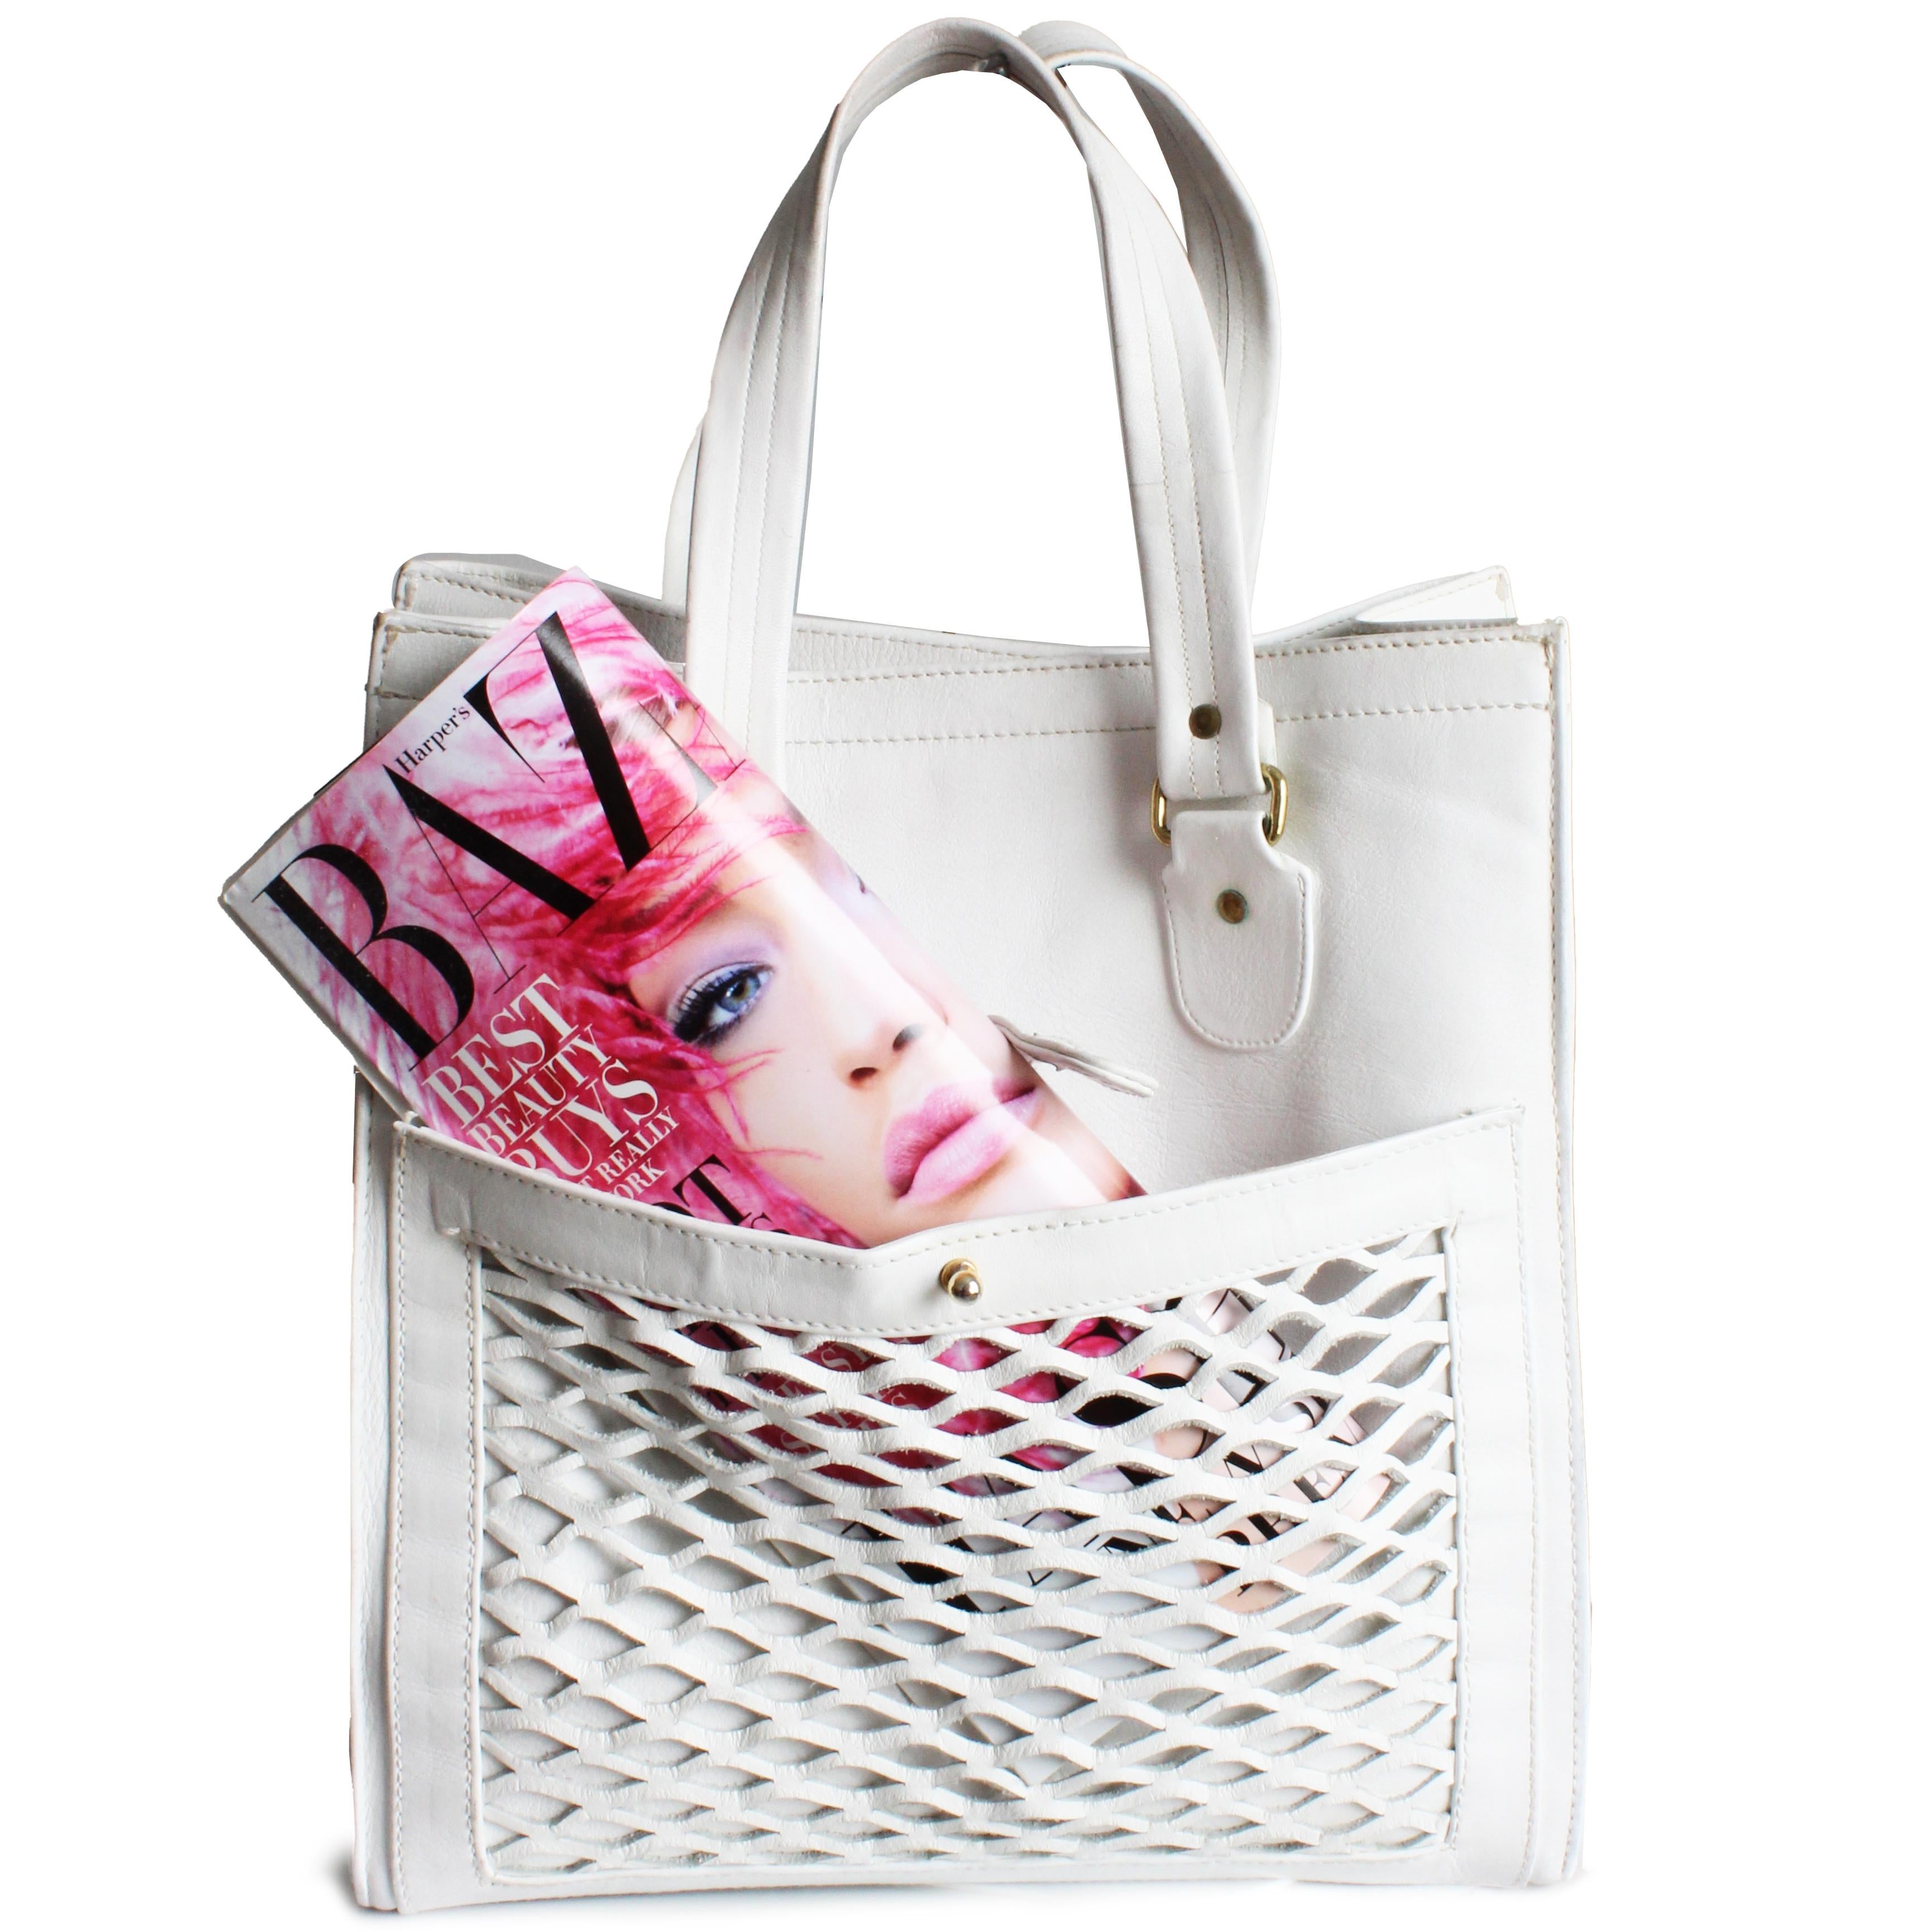 Preowned, vintage, authentic Bonnie Cashin for Meyers large white leather tote bag with basket weave pocket, likely made in the mid 70s following her time at Coach Leatherware. Made from white leather, it features a large basket weave pocket on the